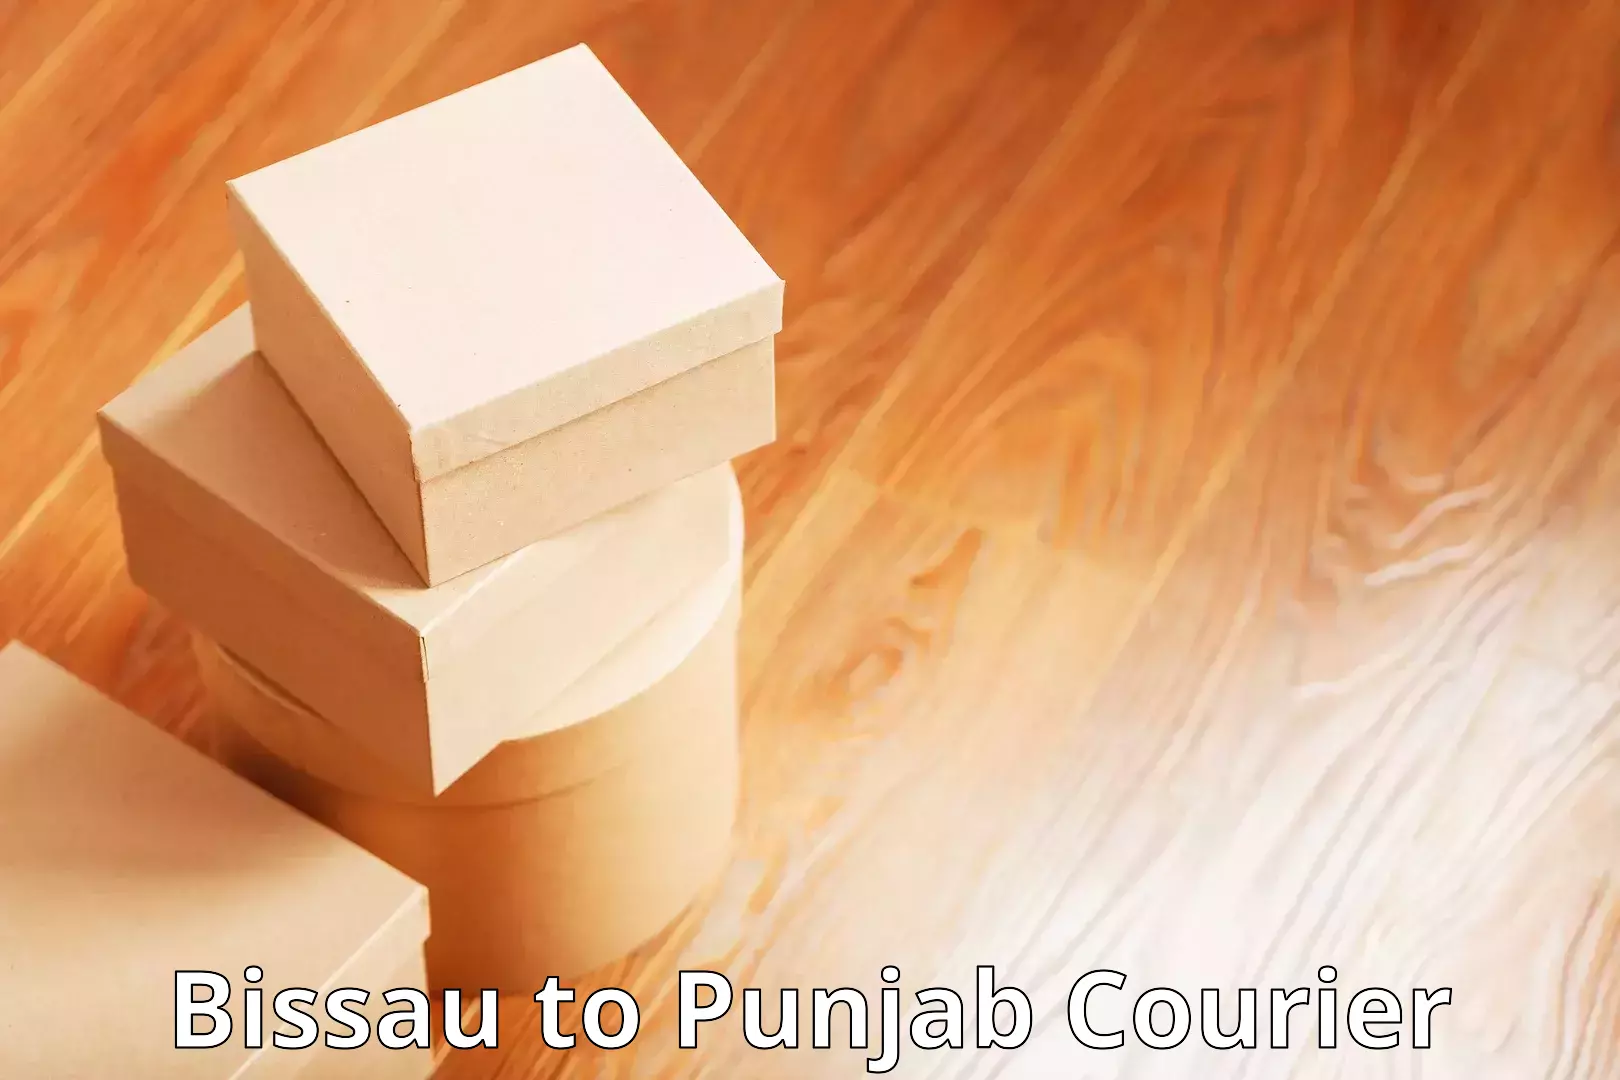 State-of-the-art courier technology Bissau to Goindwal Sahib